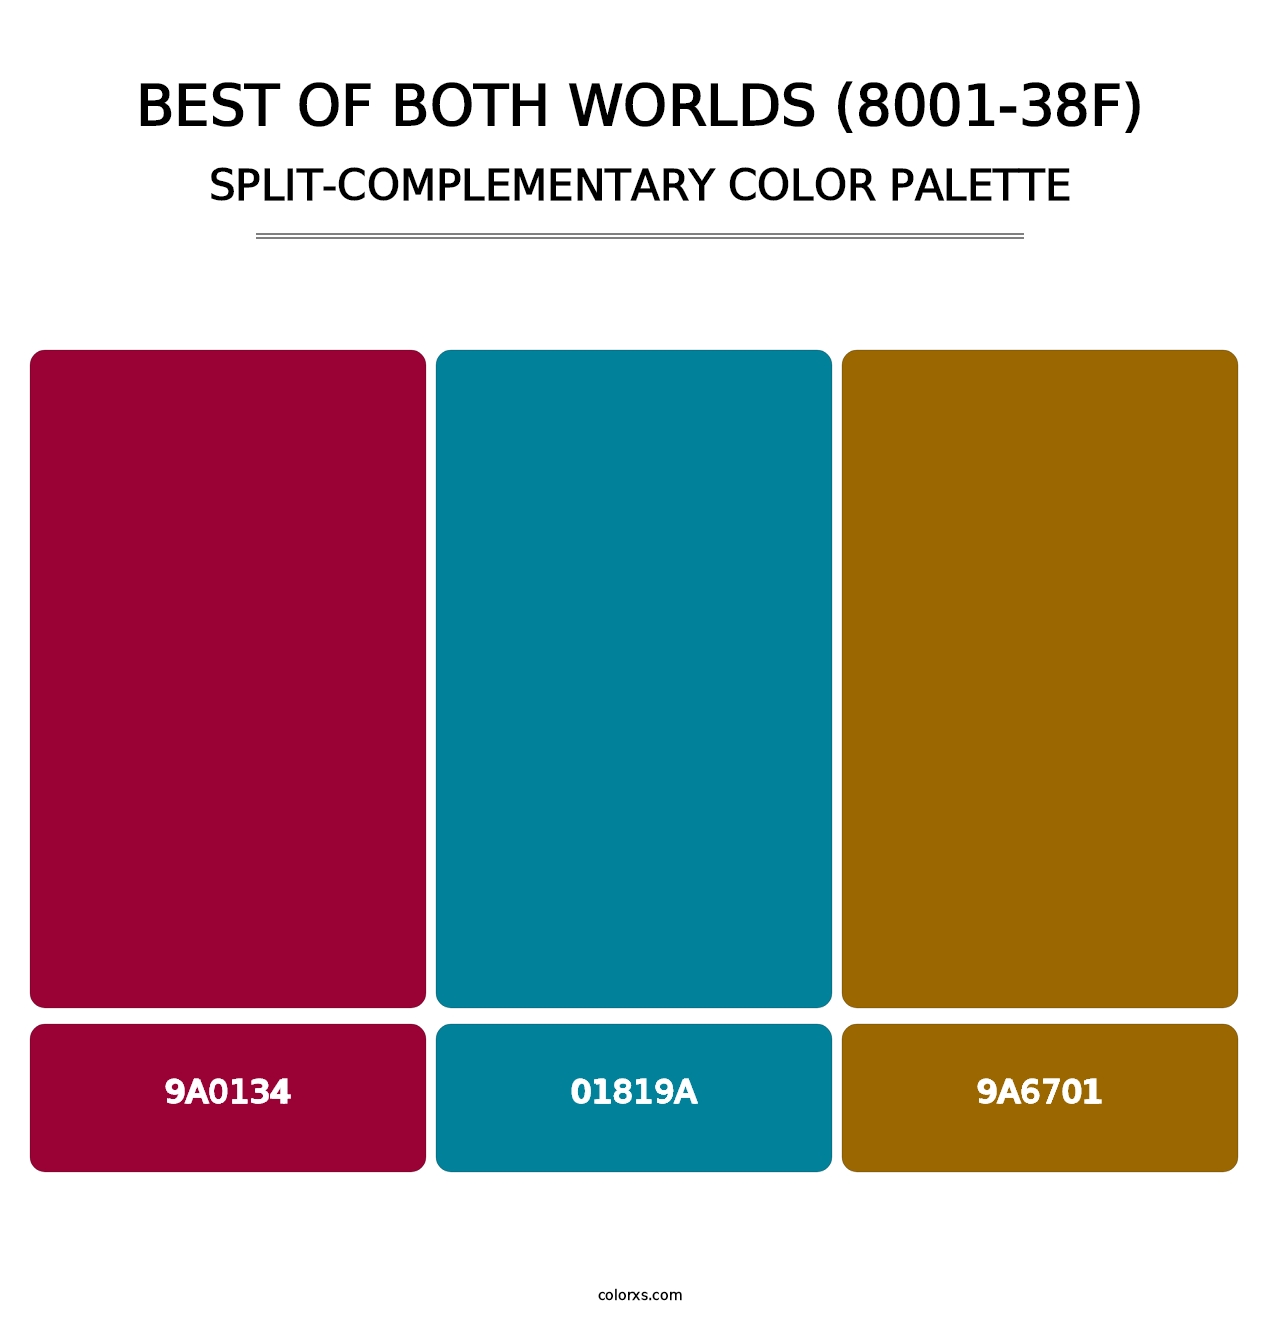 Best of Both Worlds (8001-38F) - Split-Complementary Color Palette